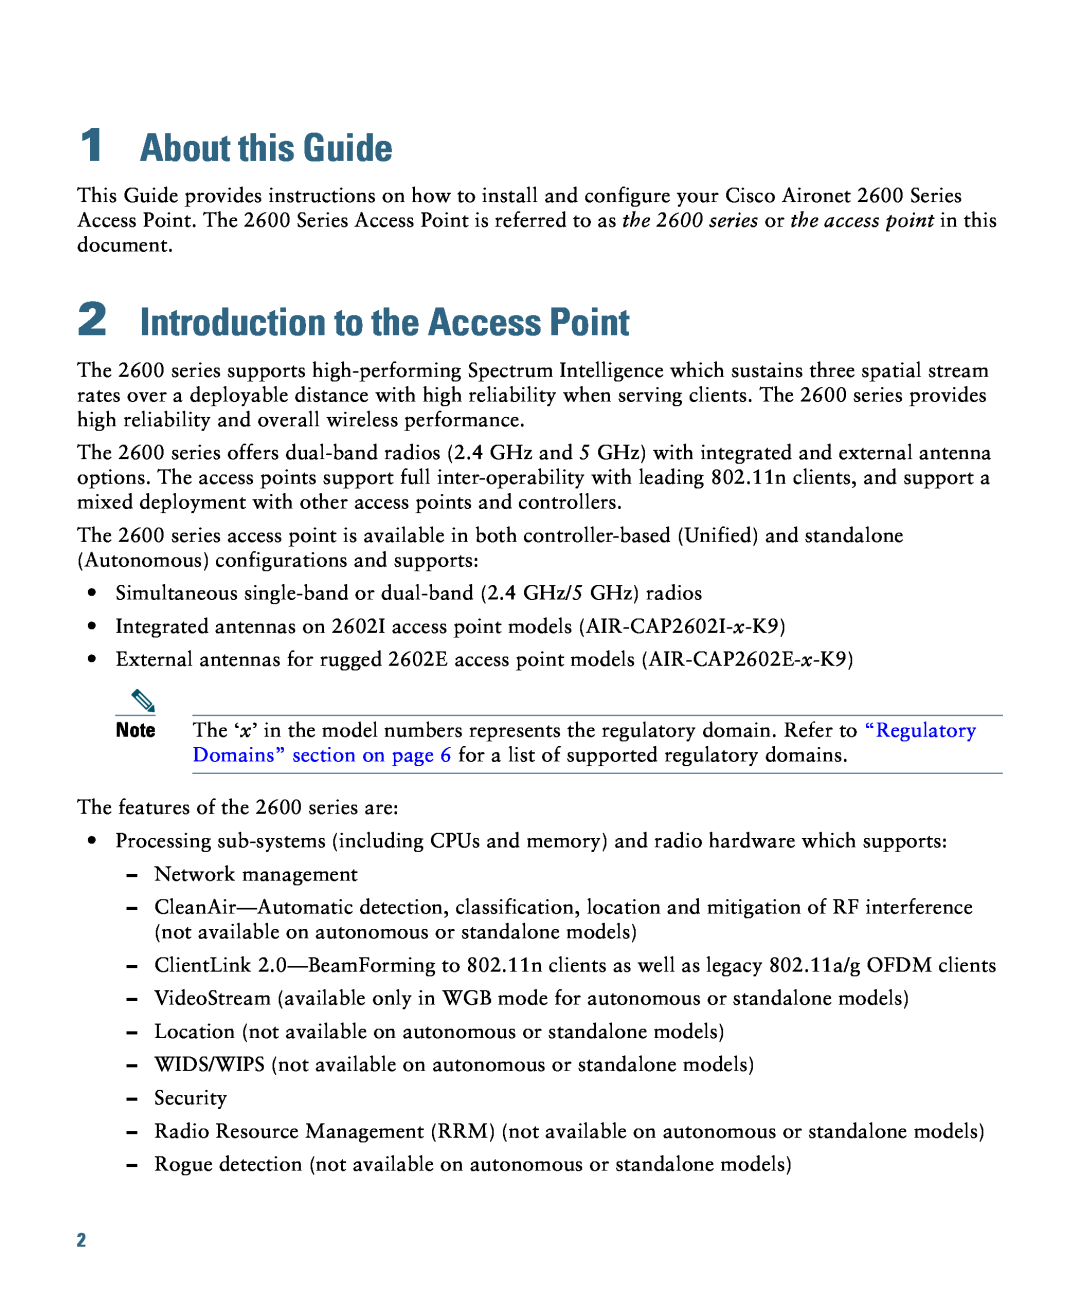 Cisco Systems AIRSAP2602EAK9, AIRSAP2602IAK9, AIRCAP2602ICK9, 2600I About this Guide, Introduction to the Access Point 